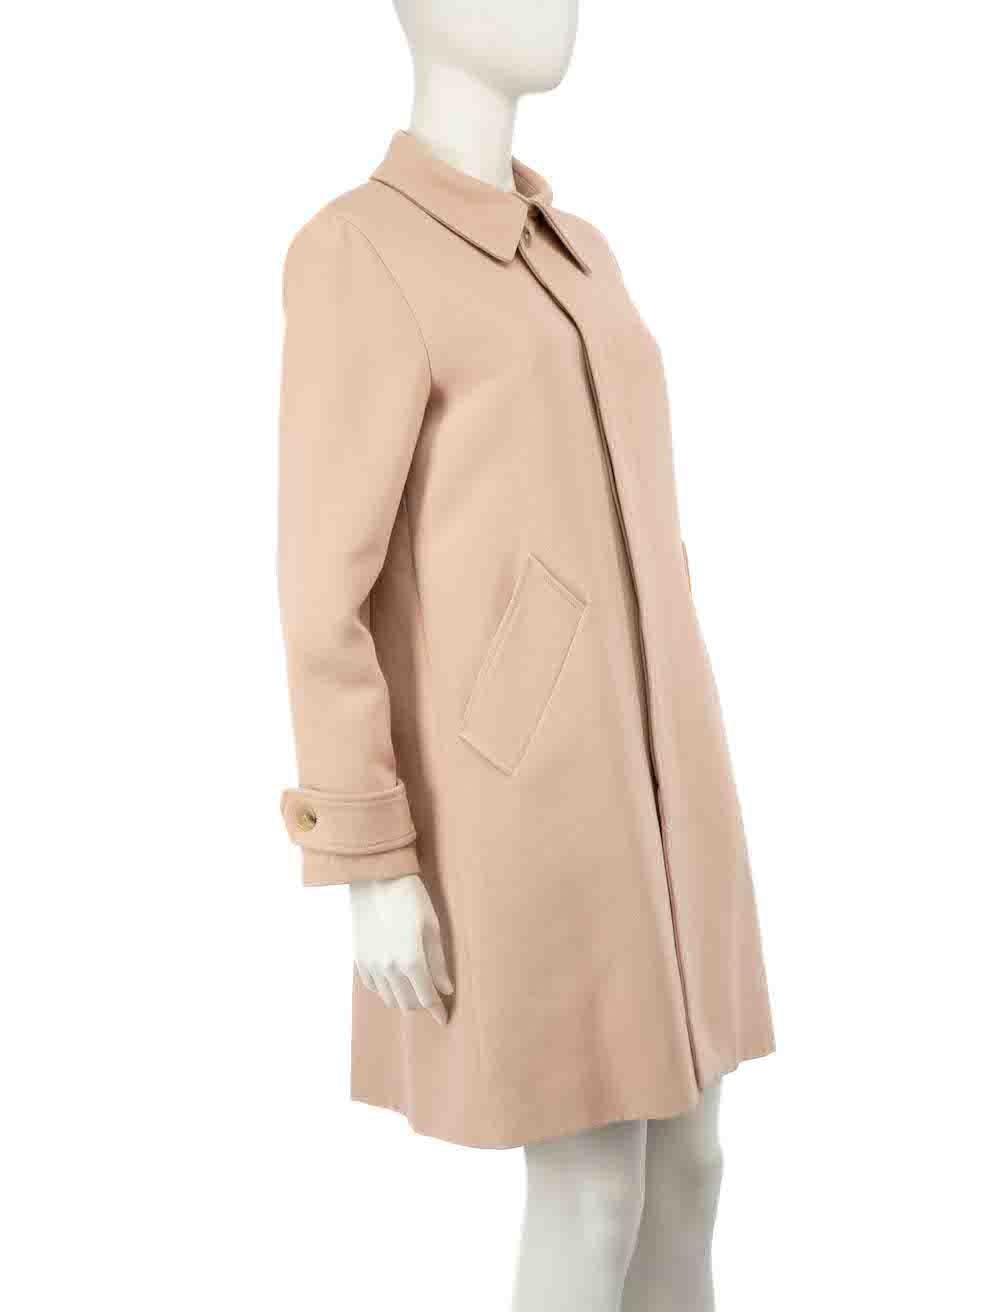 CONDITION is Very good. Minimal wear to coat is evident. Minimal pull thread right arm on this used A.P.C. designer resale item.
 
 
 
 Details
 
 
 Pink
 
 Cotton
 
 Coat
 
 Mid length
 
 Button up fastening
 
 Buttoned cuffs
 
 2x Side pockets
 
